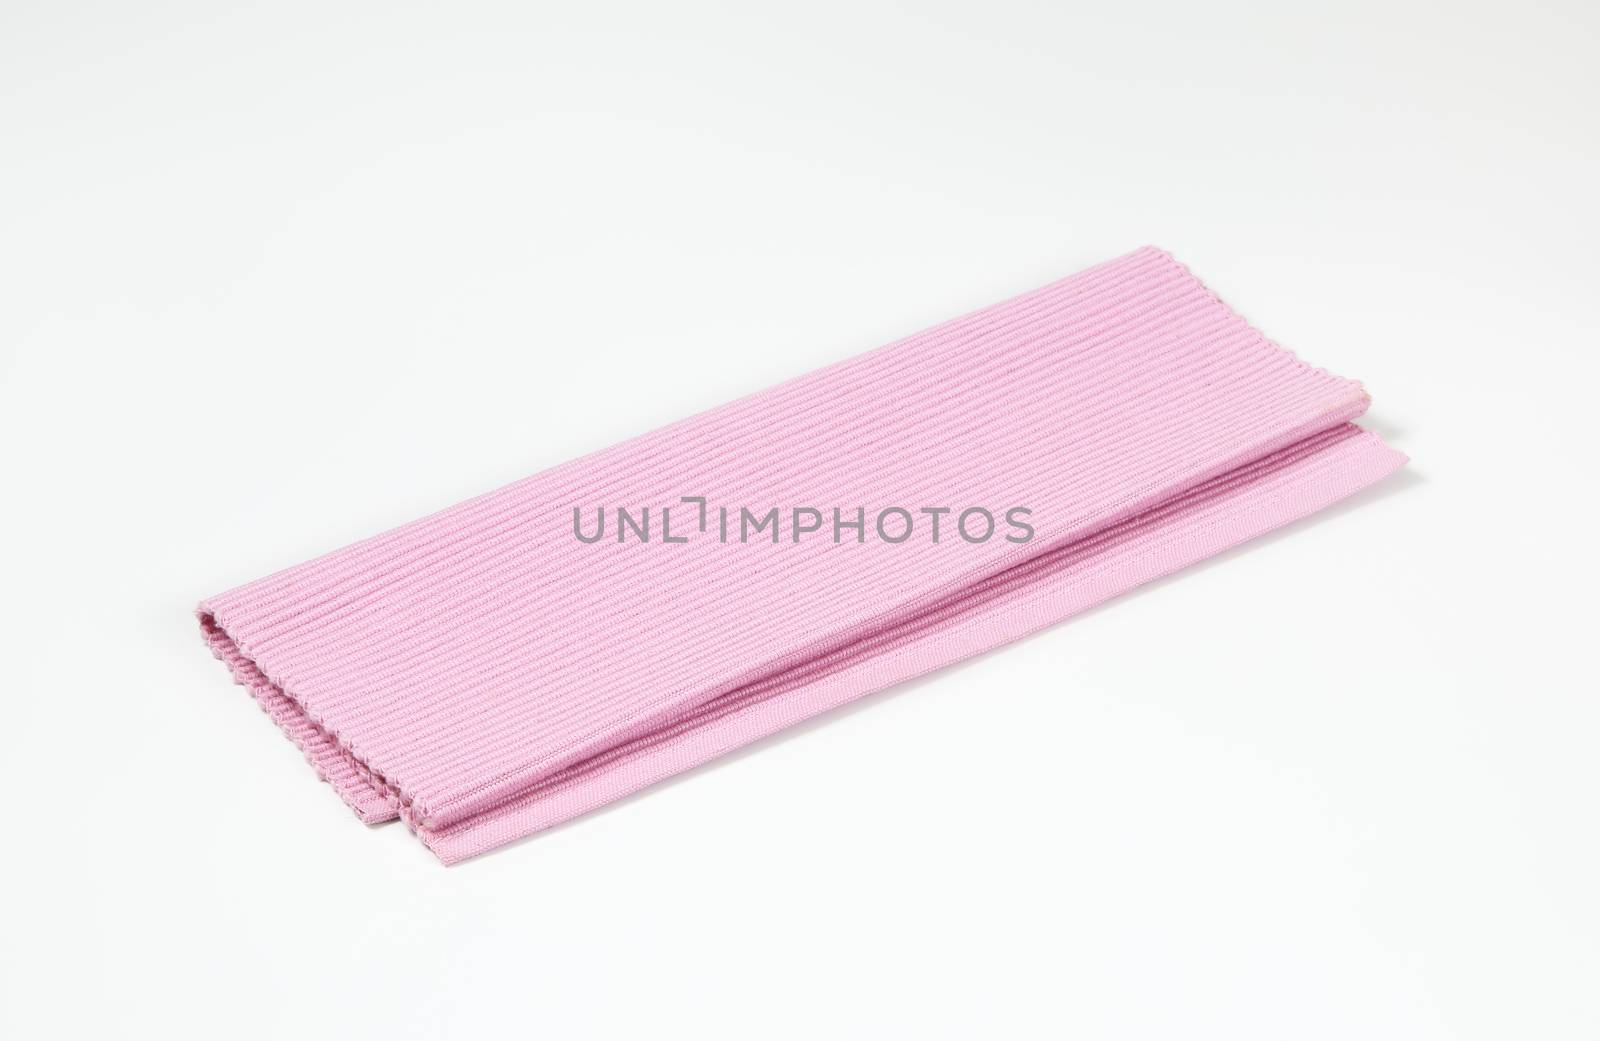 Ribbed pink placemat by Digifoodstock